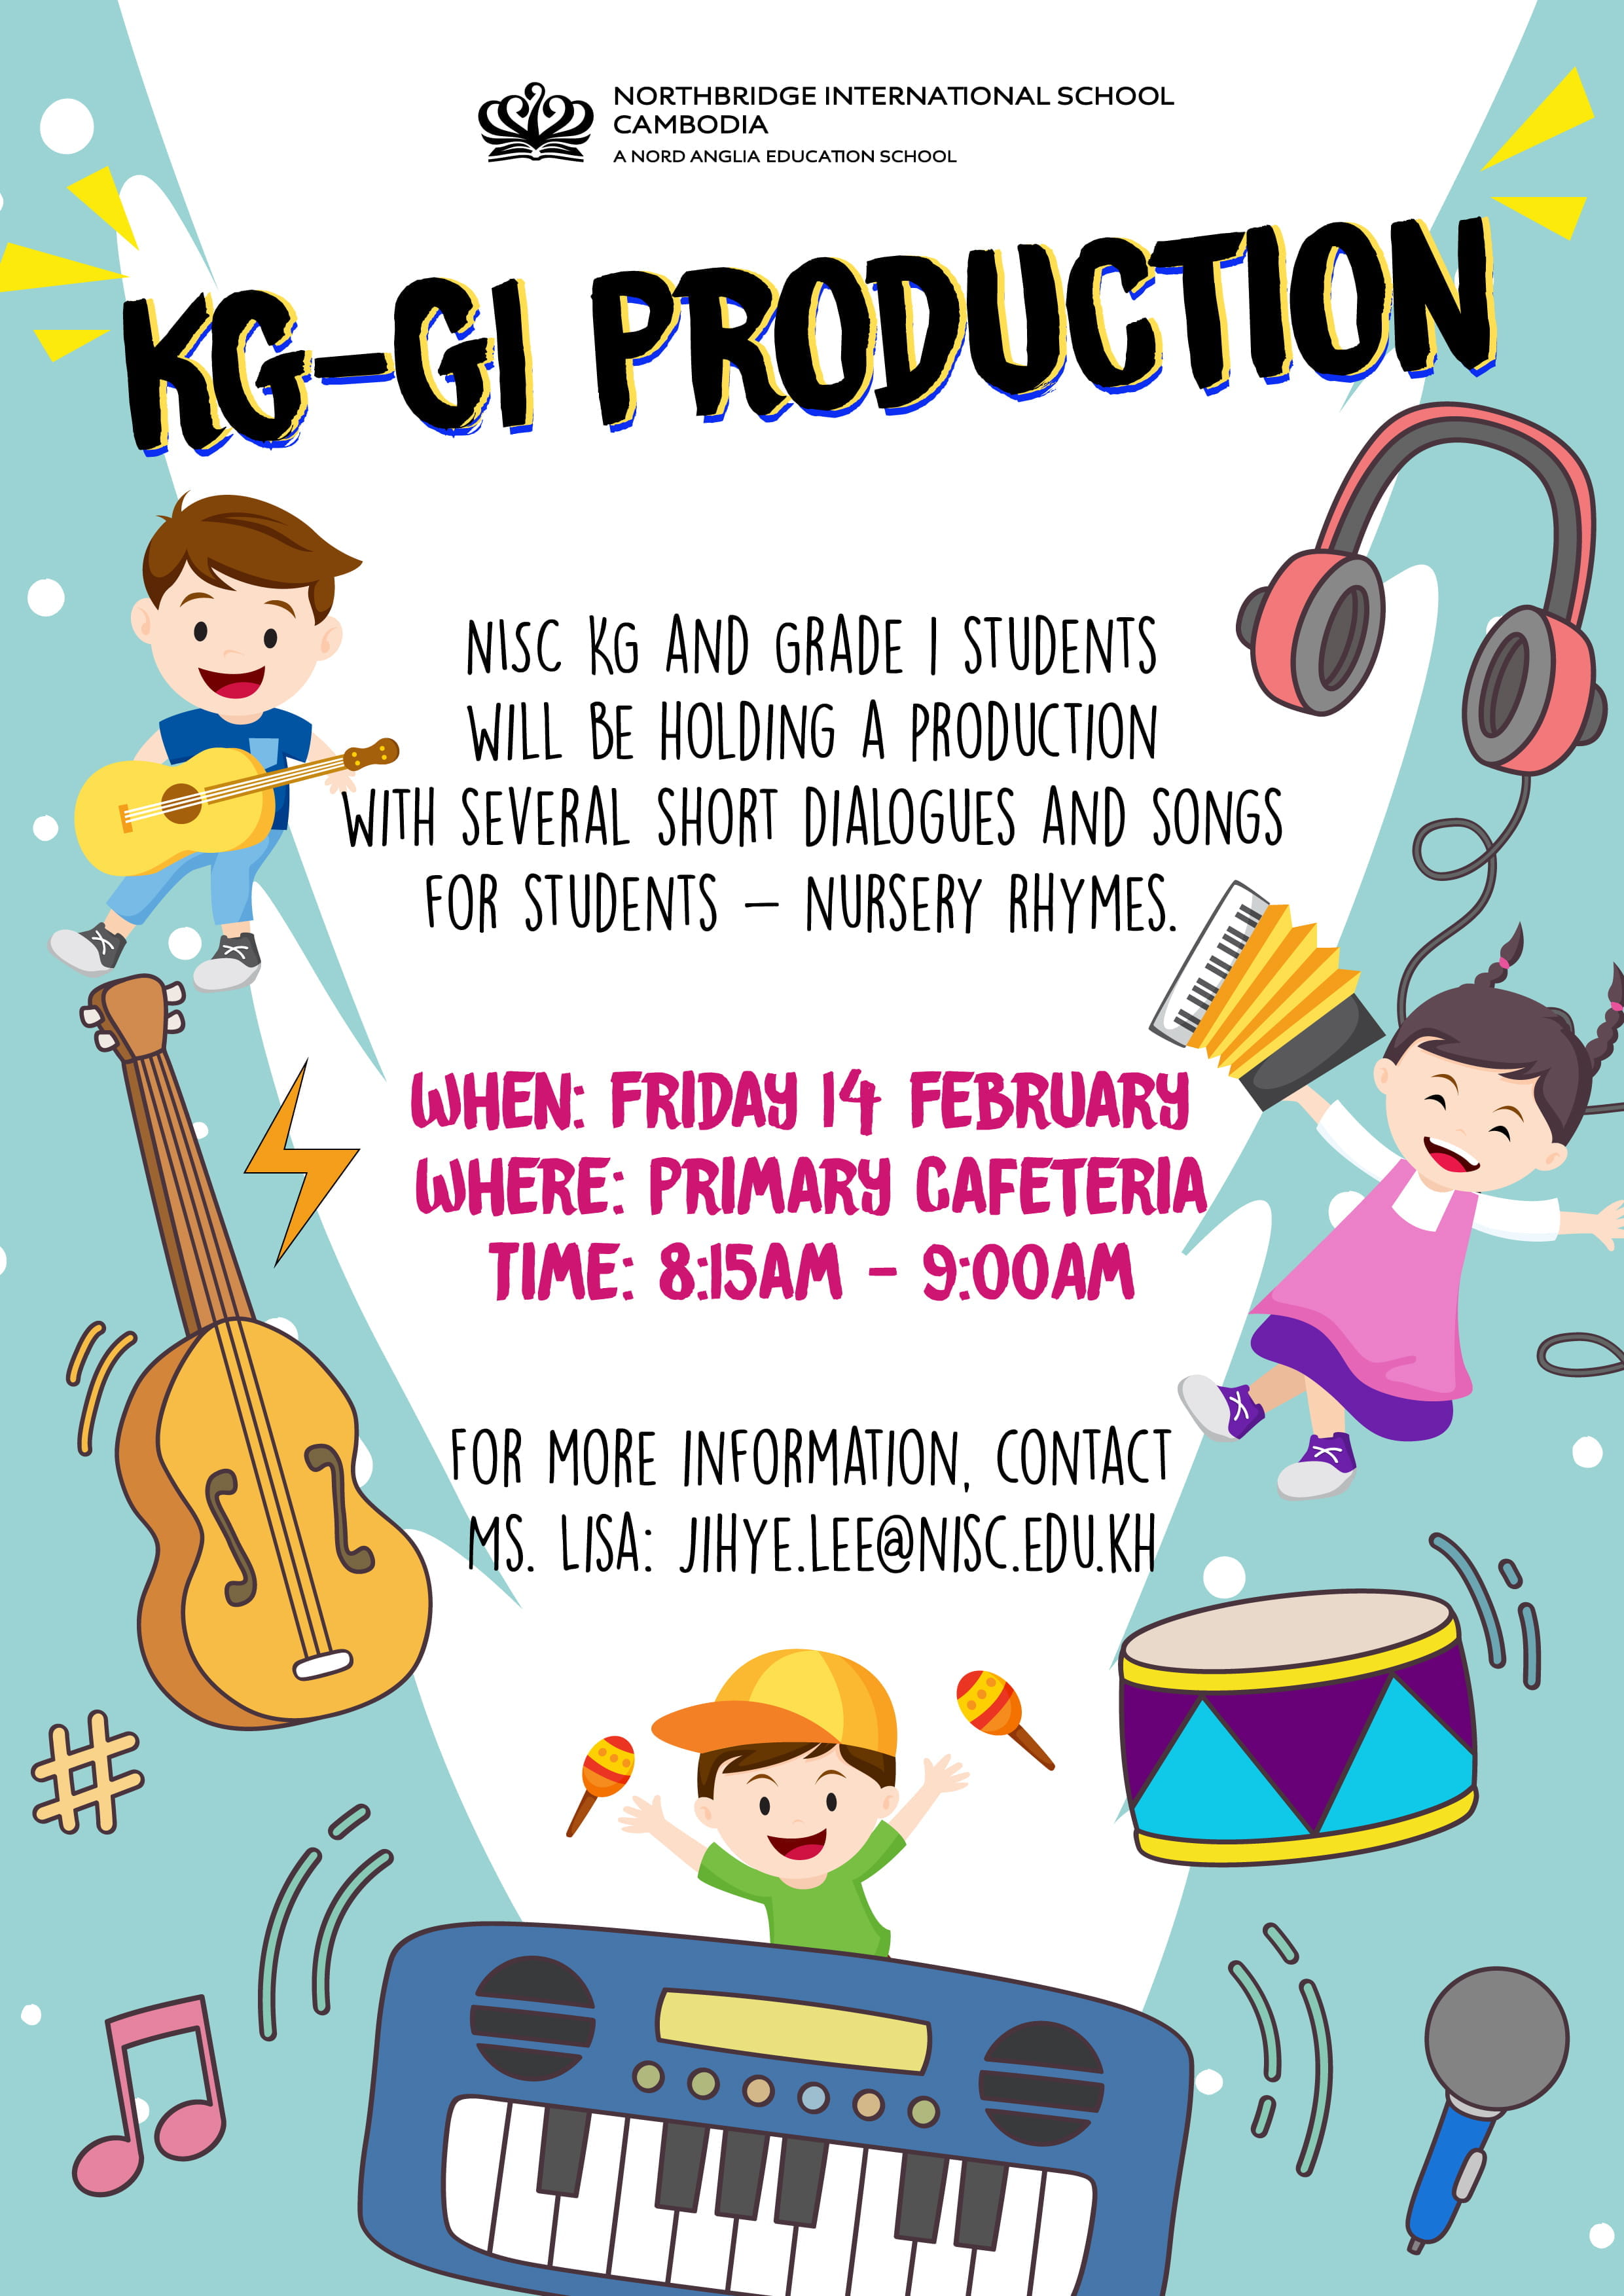 The ways we continue to focus on how Northbridge staff can ensure all students learn and grow-the-ways-we-continue-to-focus-on-how-northbridge-staff-can-ensure-all-students-learn-and-grow-KGG1 Production_Poster_V201